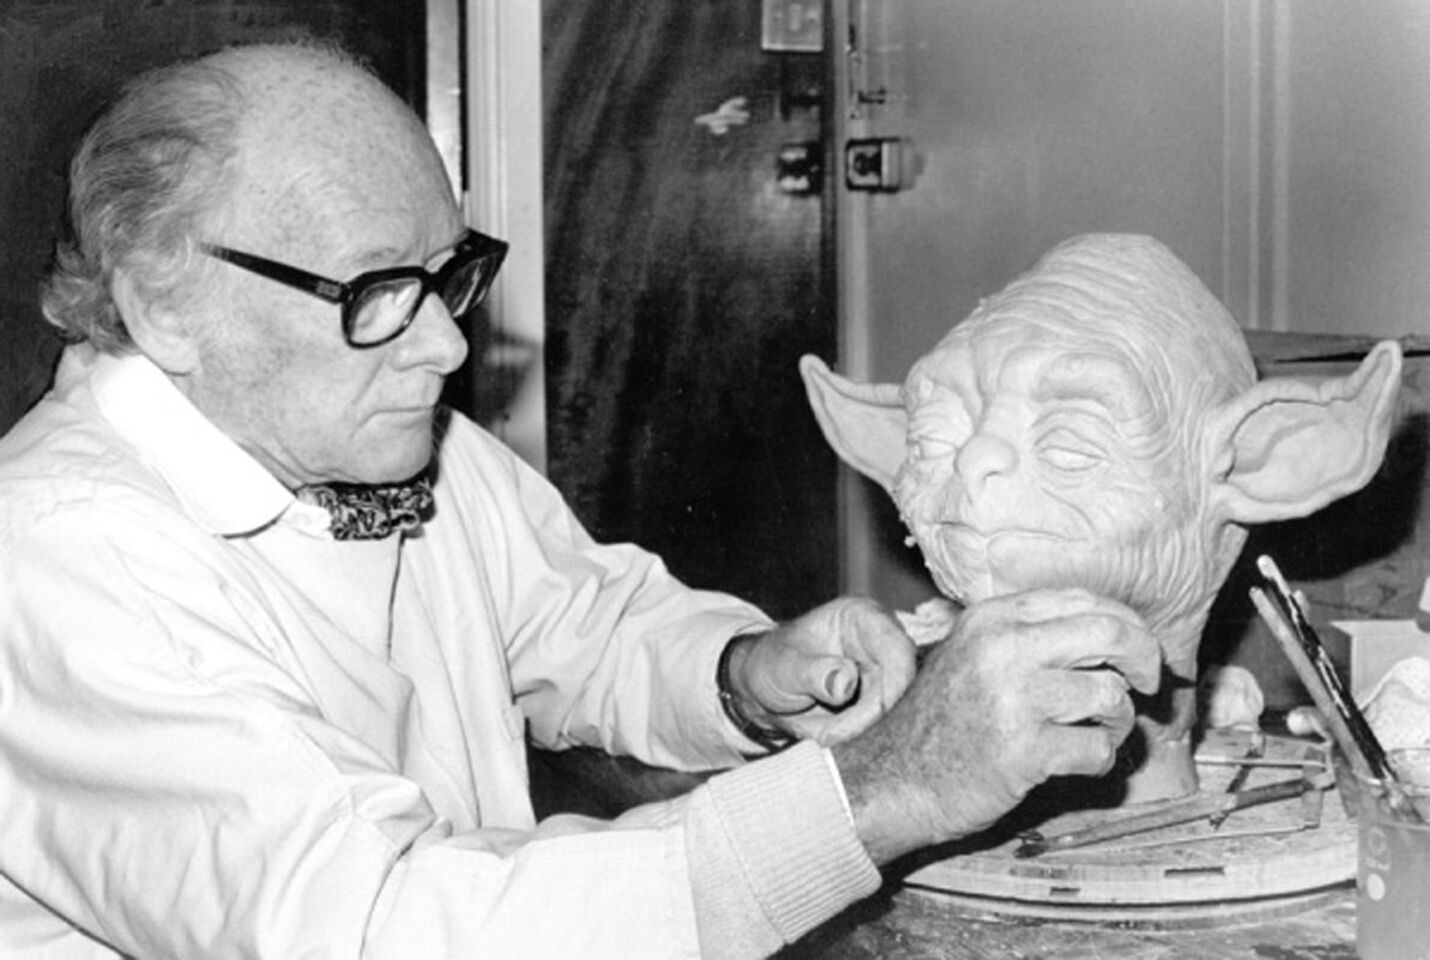 A legend in moviemaking for his makeup work in "2001: A Space Odyssey," Freeborn went on to create looks for "Star Wars" characters Yoda, Chewbacca, the Ewoks and Jabba the Hutt. His pioneering career spanned seven decades. He was 98. Full obituary Notable deaths of 2012